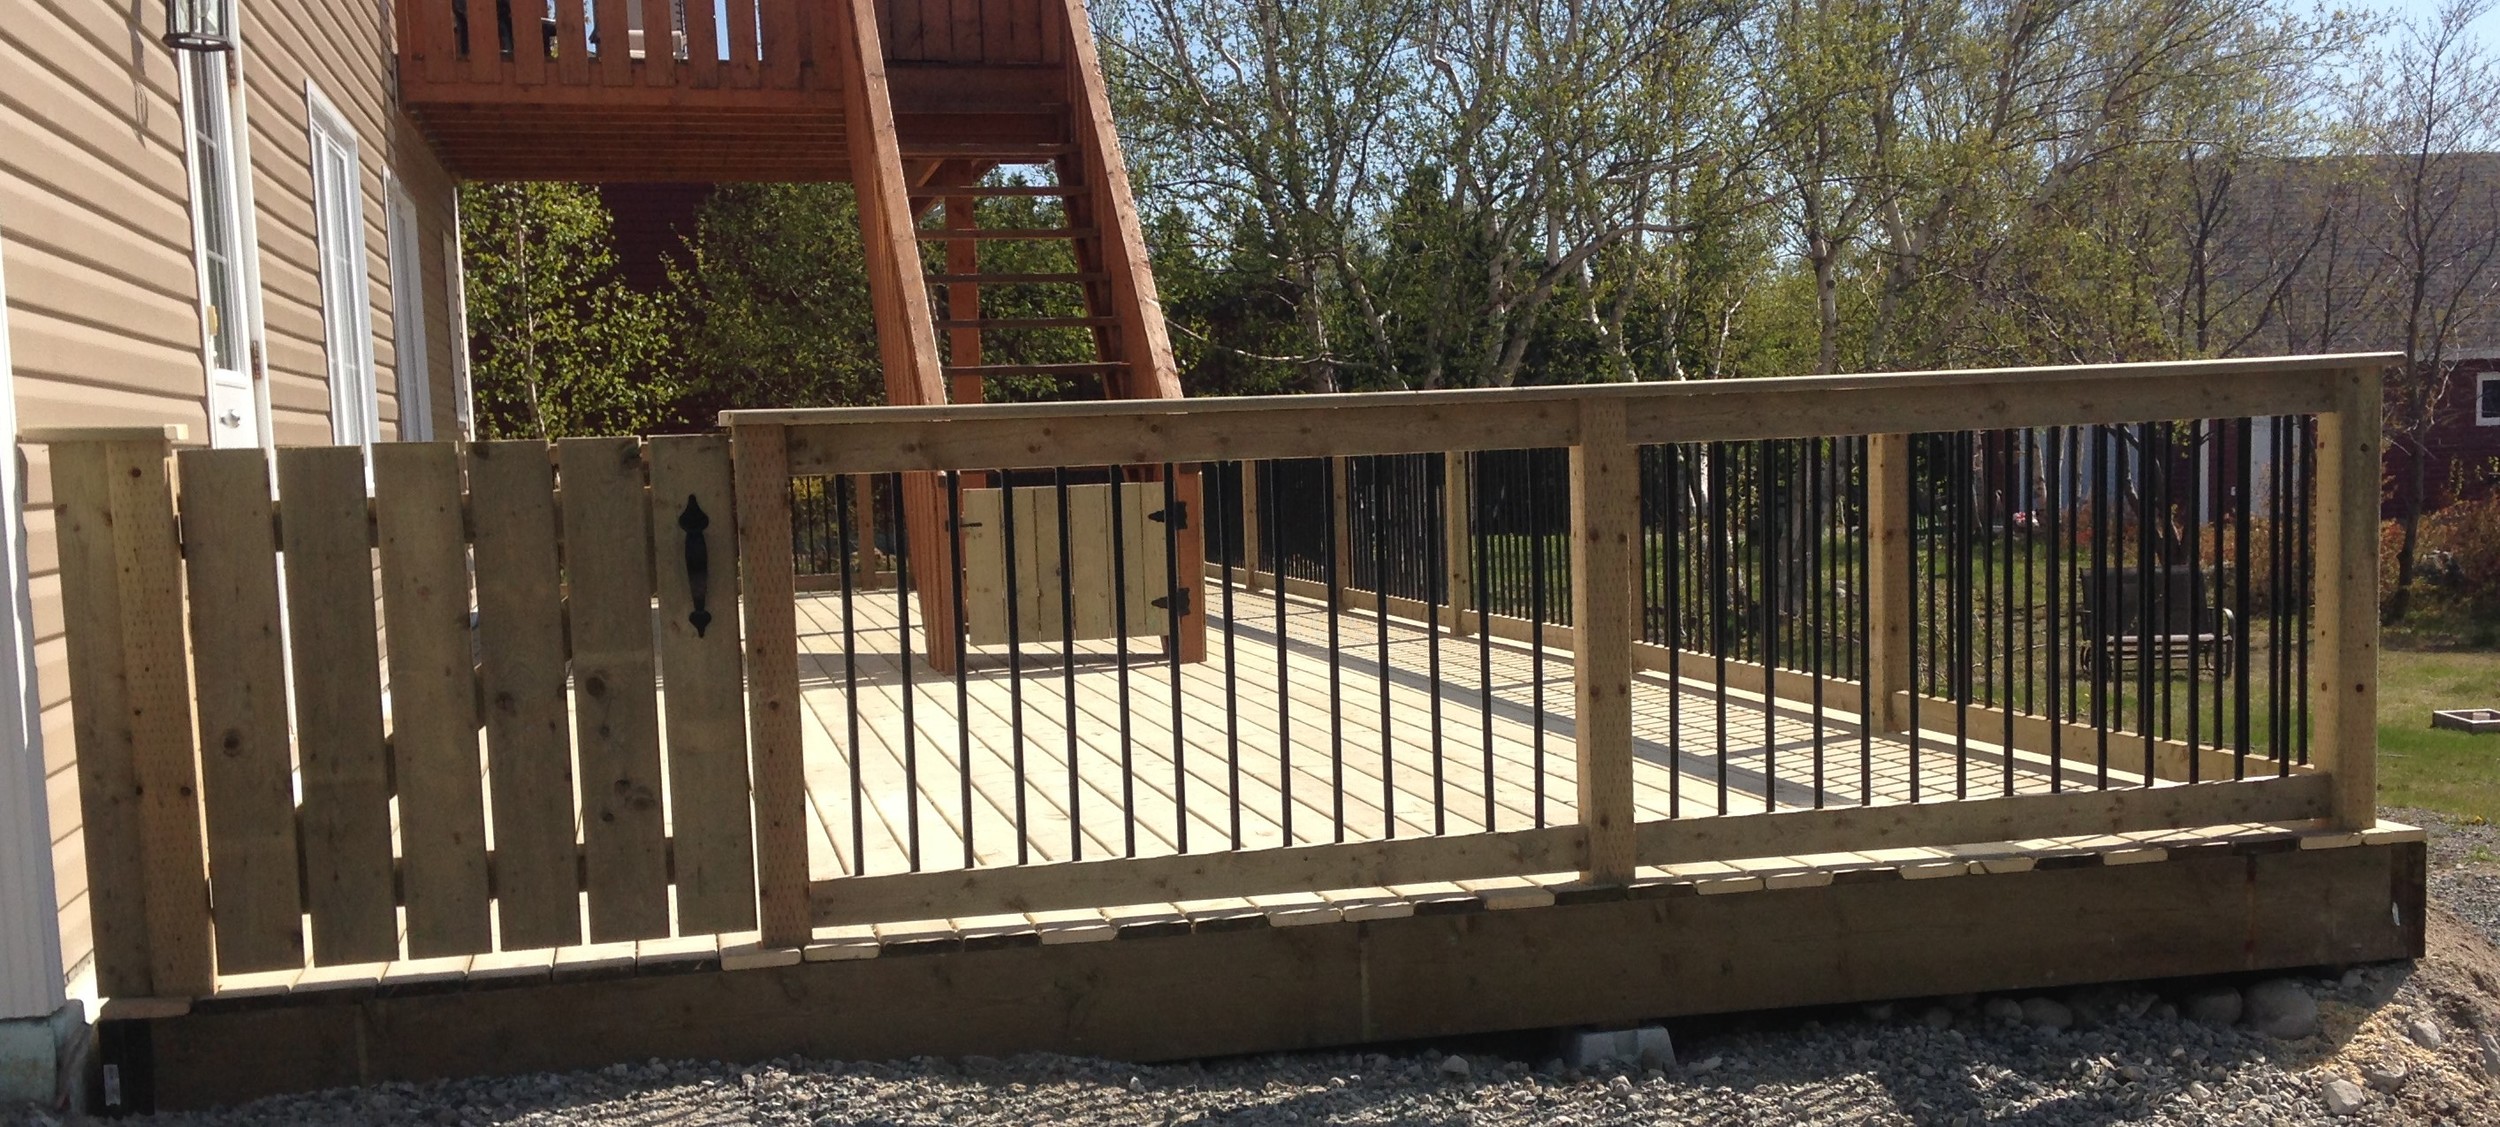 14' x 40' deck with wooden rails and rod iron spindles. 